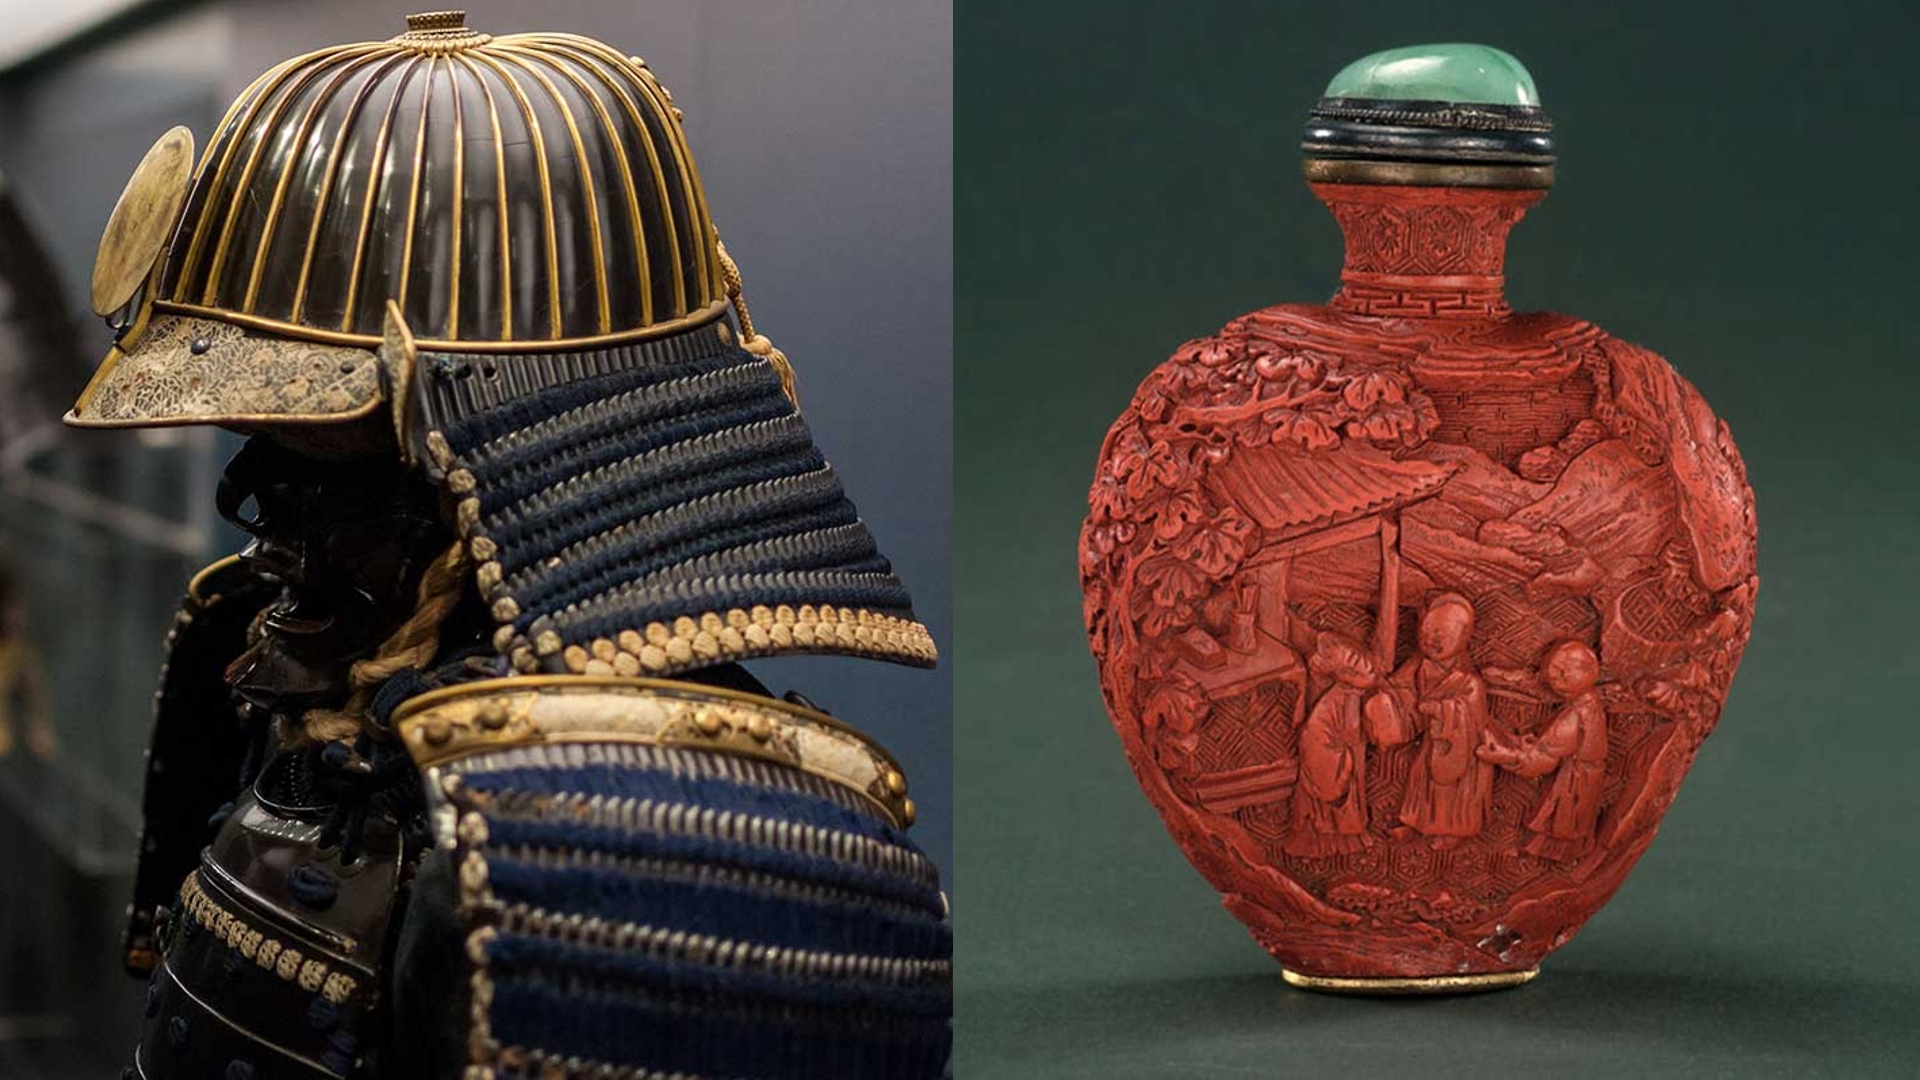 A suit of Samurai armour and a lacquer snuff-bottle from the Qing dynasty./Corfu Museum of Asian Art